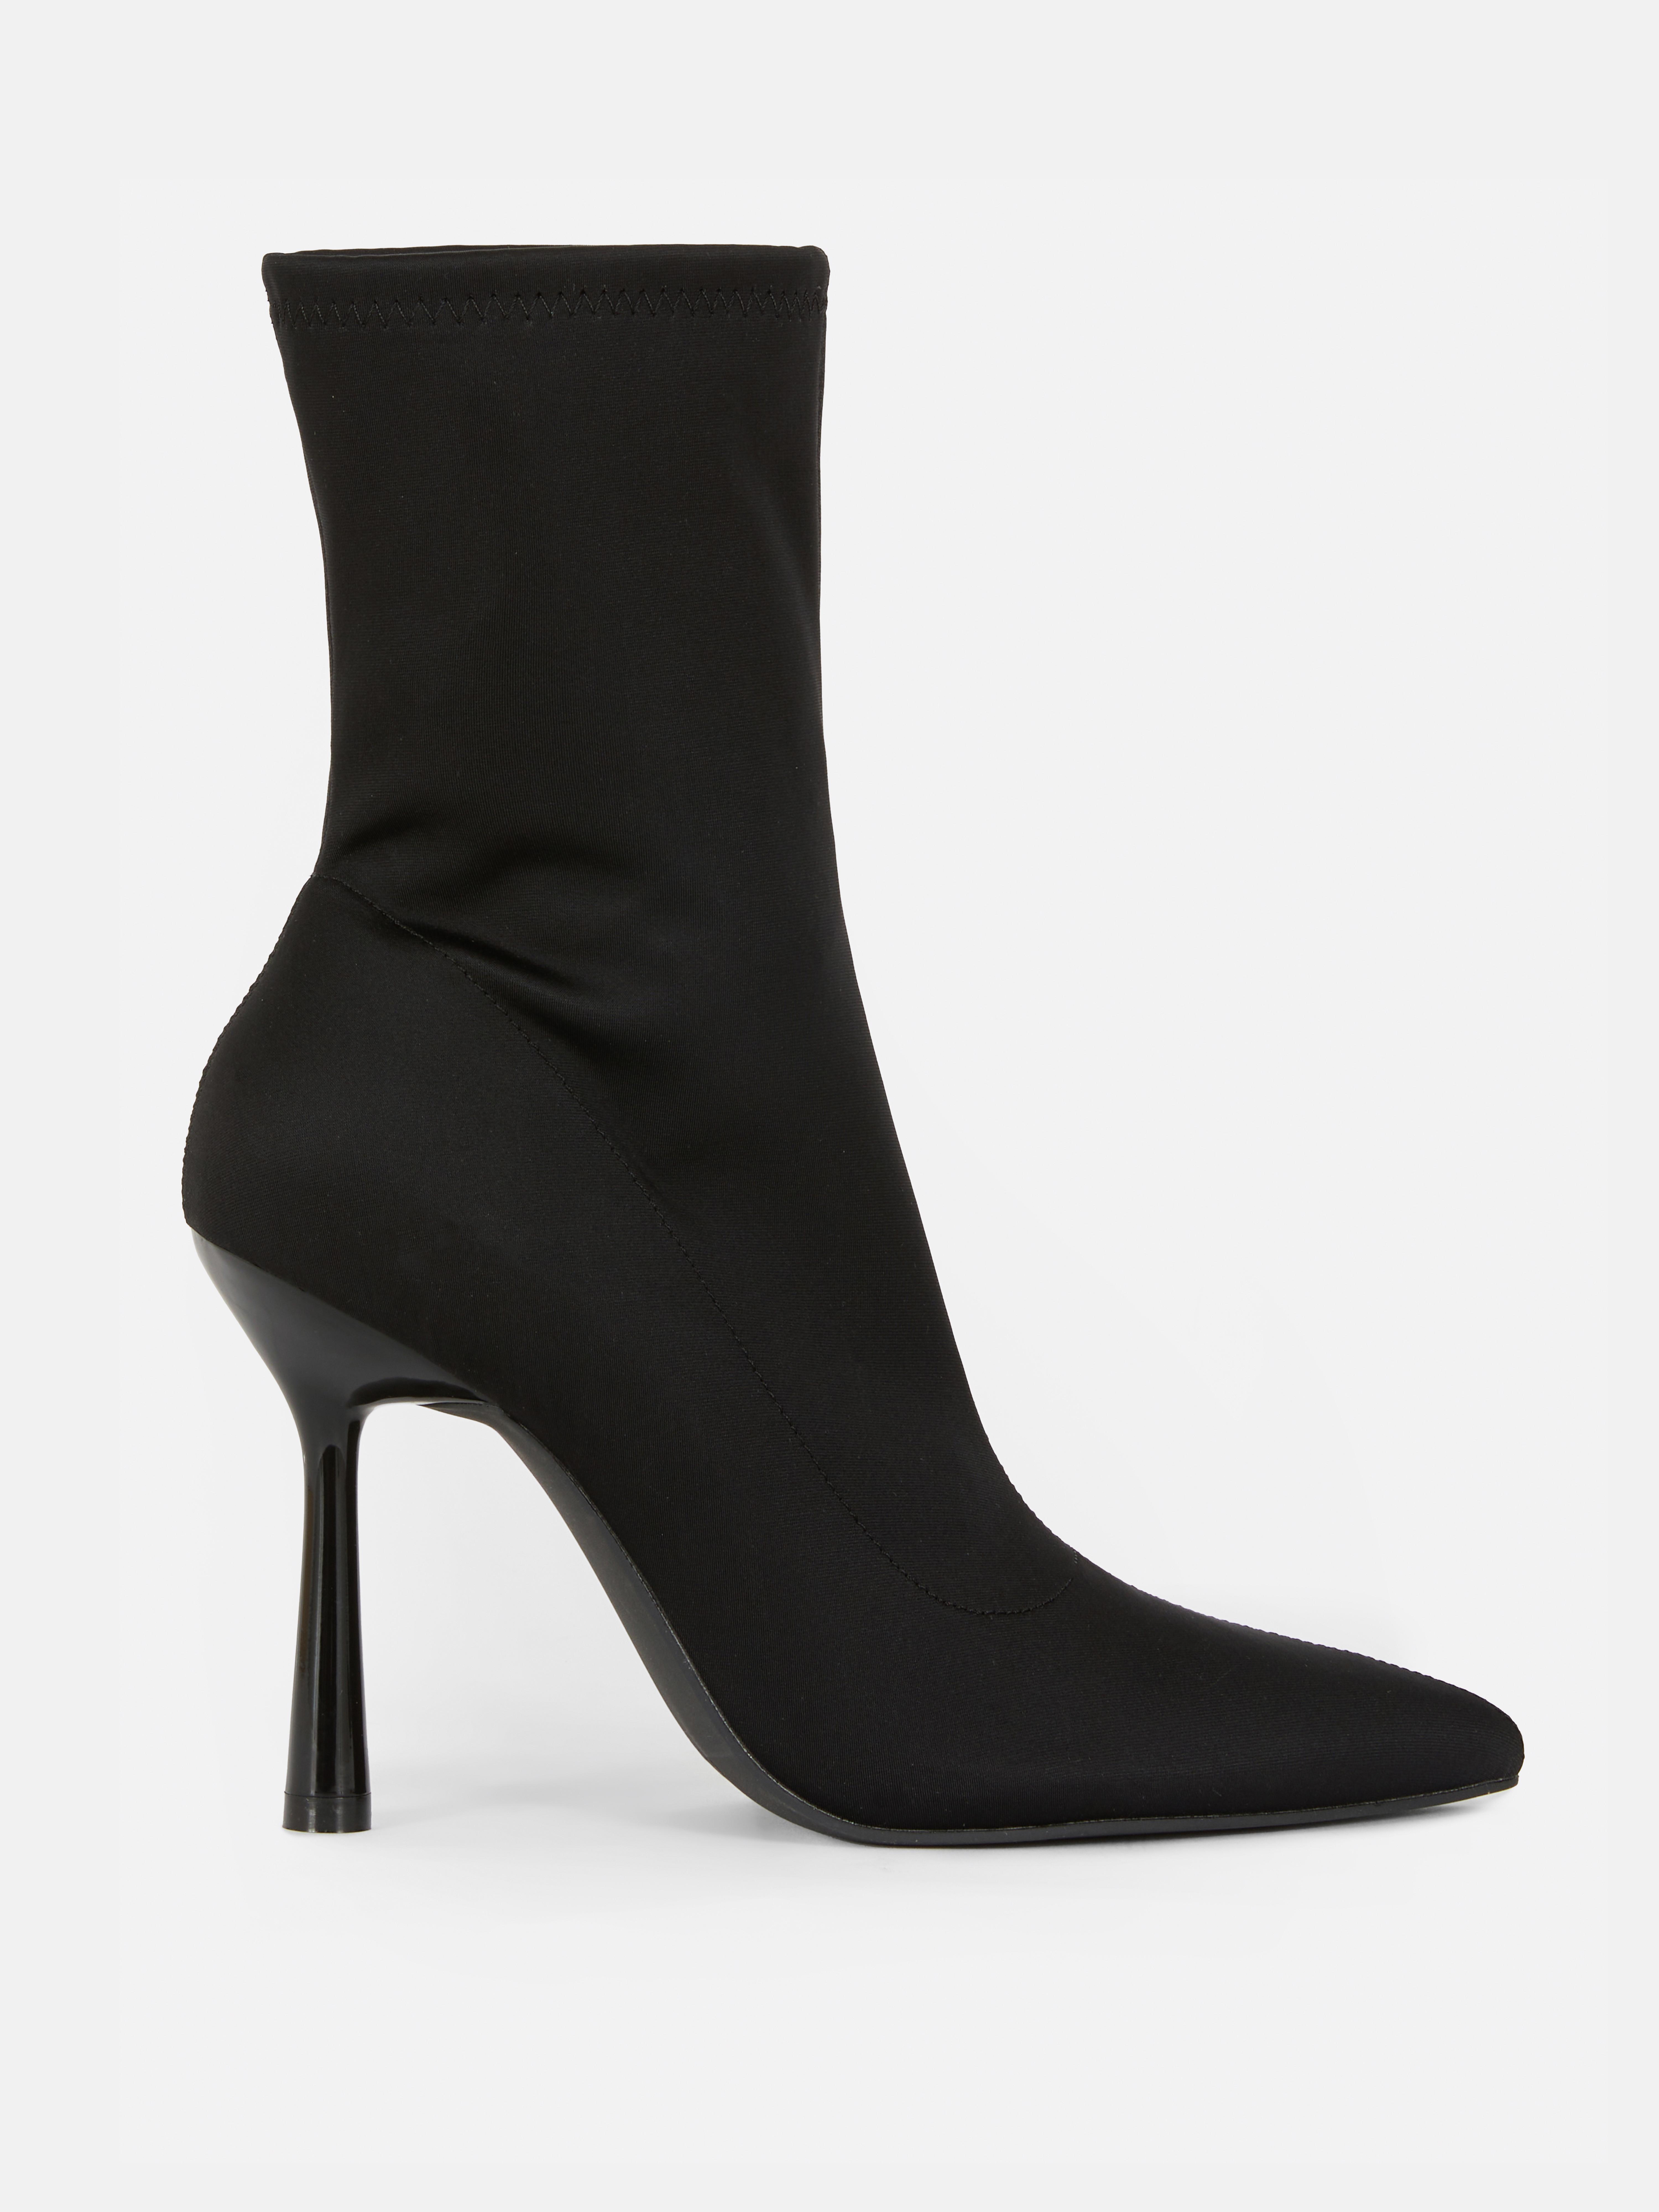 Pointed Toe Stiletto Sock Boots